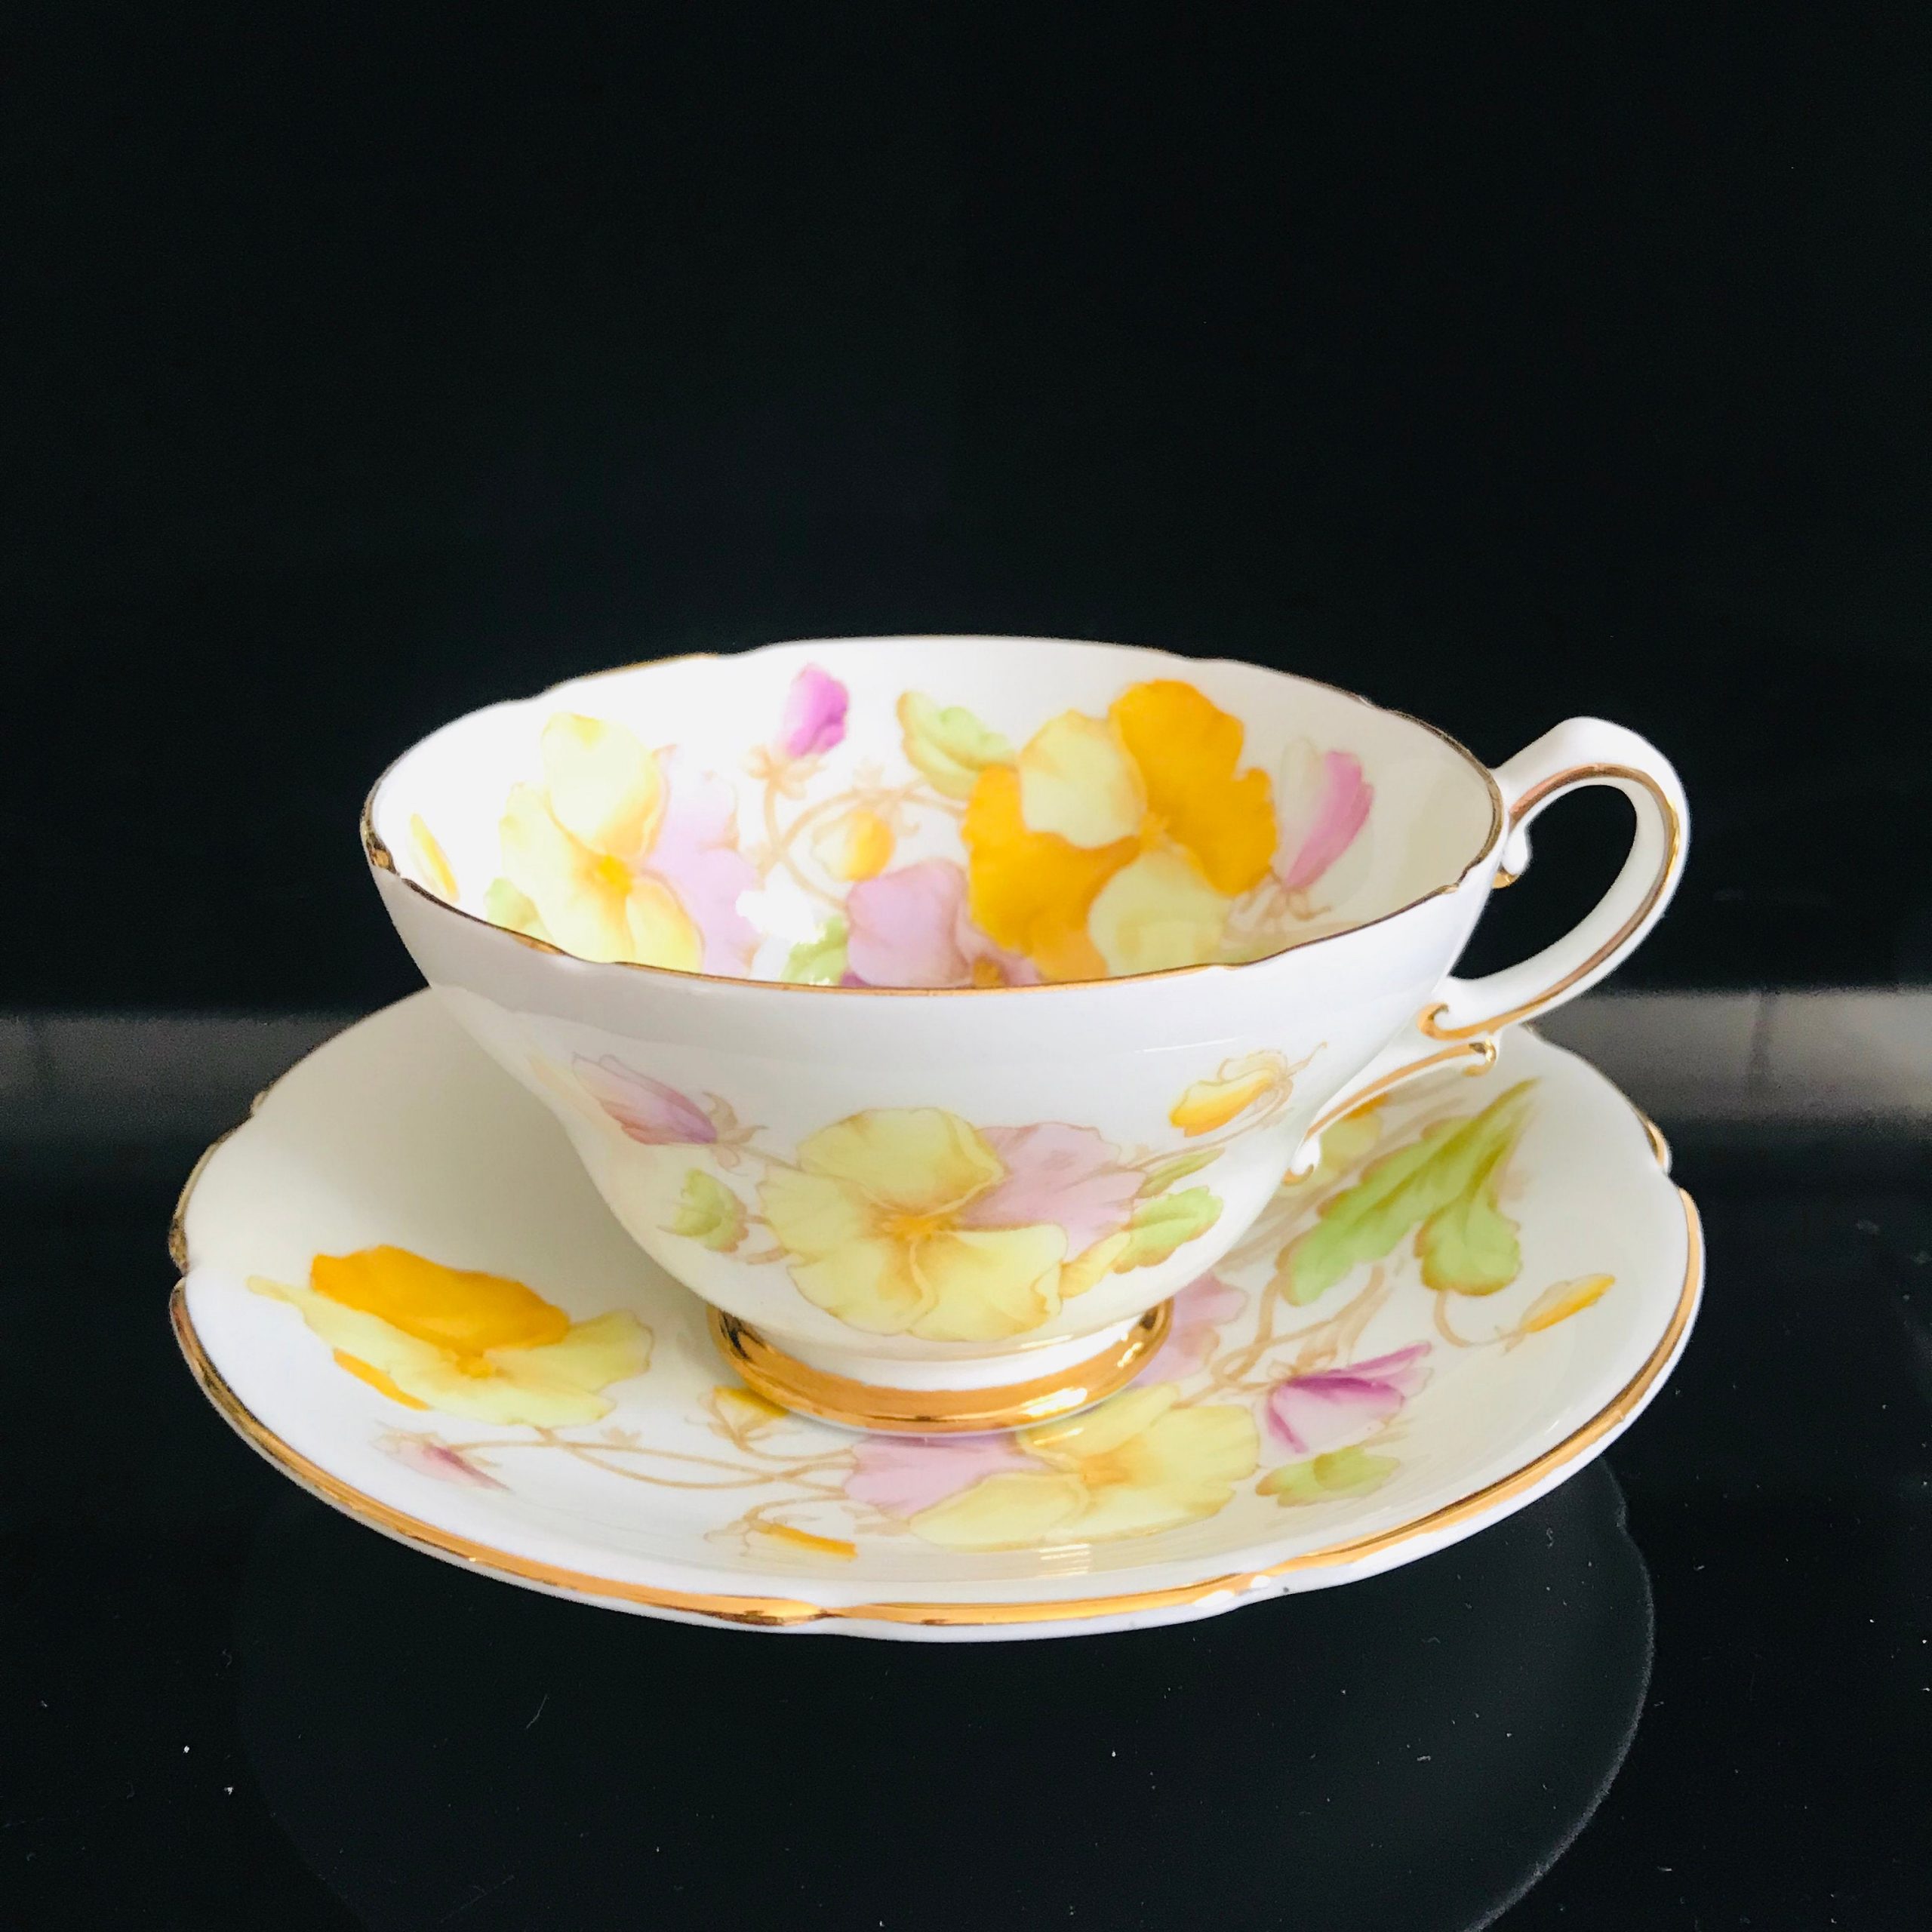 Stanley Tea Cup And Saucer England Fine Bone China Pink Purple Yellow Pansies Detailed Gold Trim